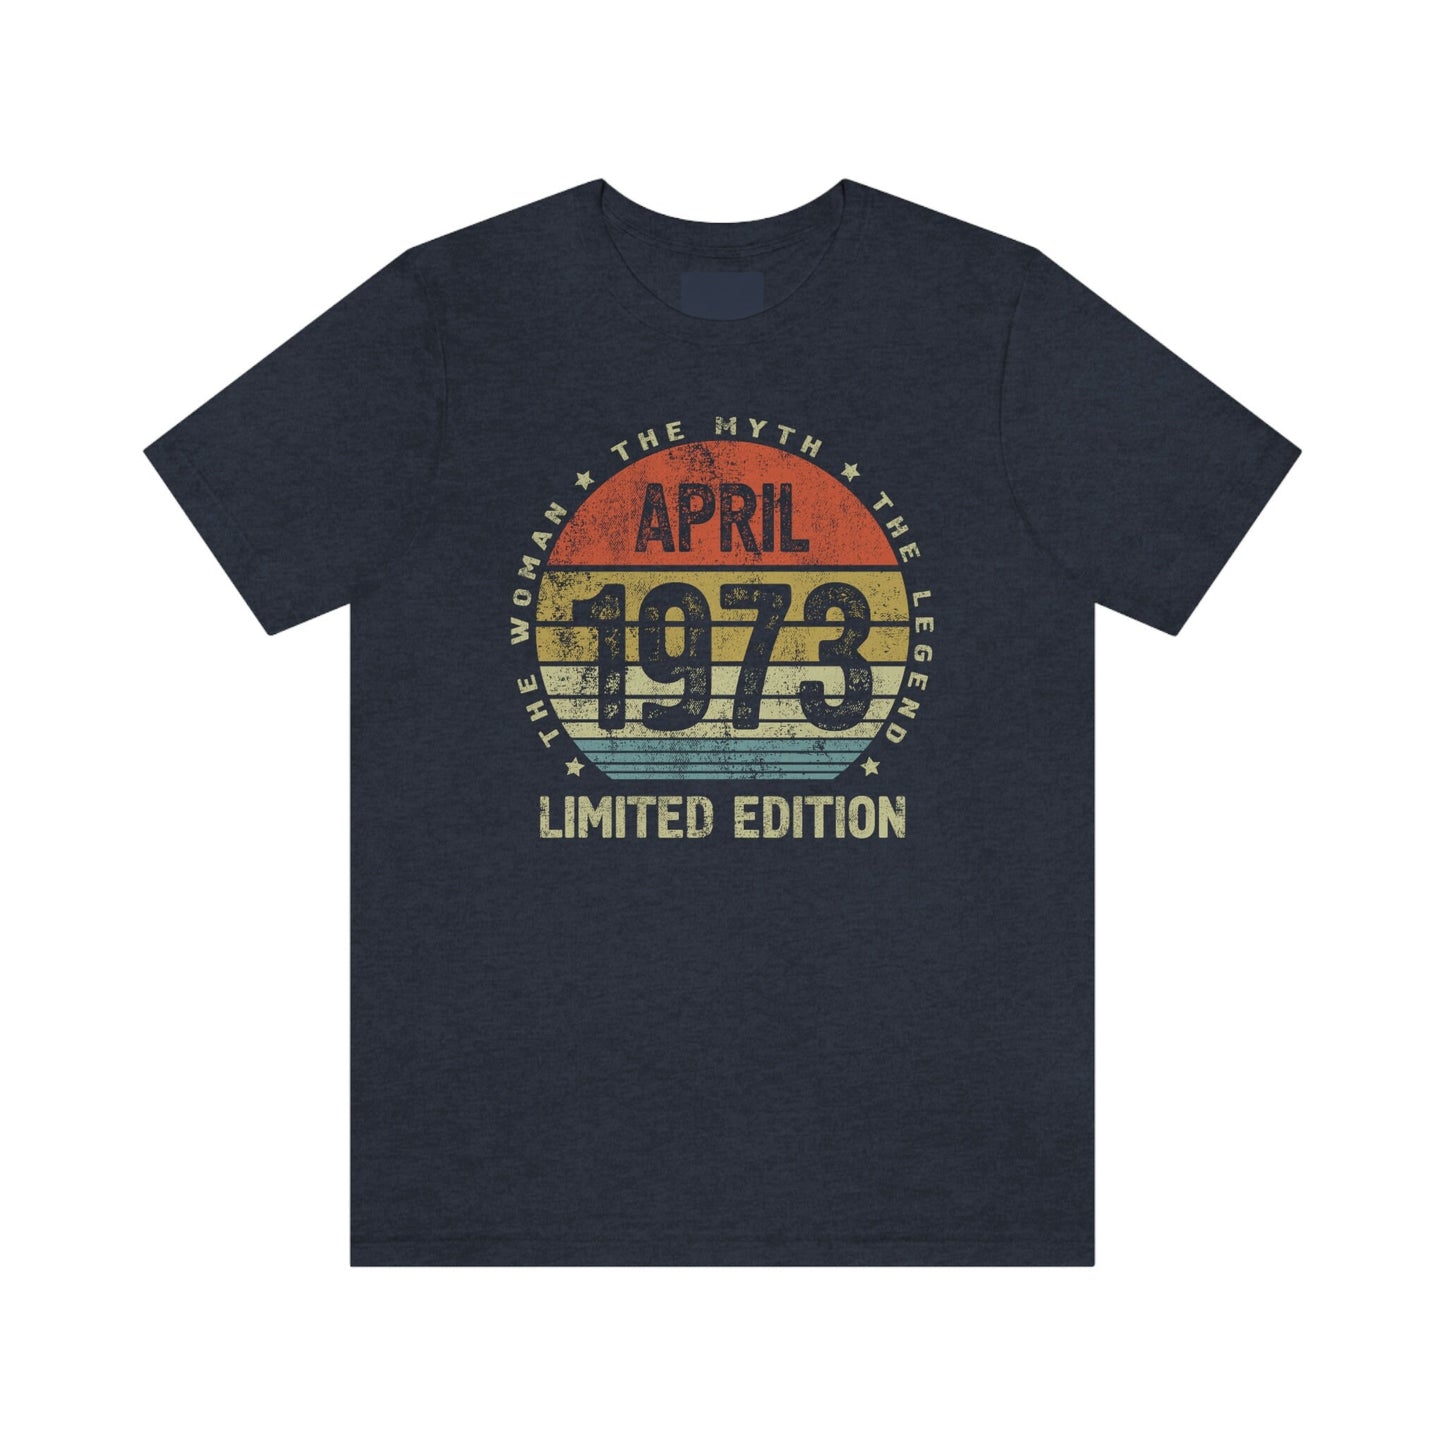 April 1973 birthday shirt for women or wife,  Gift shirt for sister or girlfriend